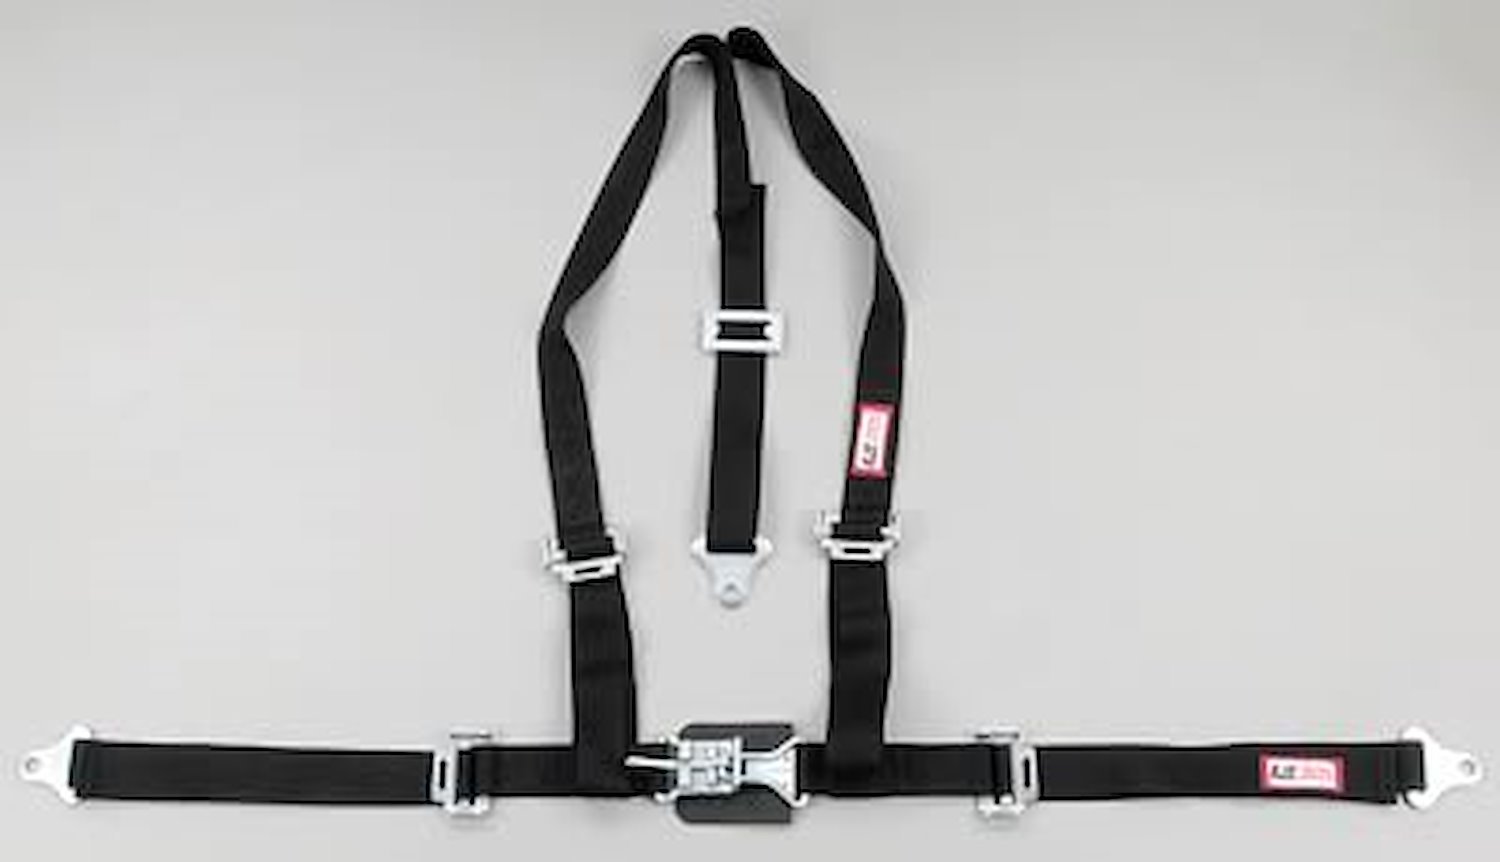 NON-SFI L&L HARNESS 3 PULL UP Lap BELT SNAP SEWN IN 2 S.H. Y FLOOR Mount WRAP/BOLT BLUE